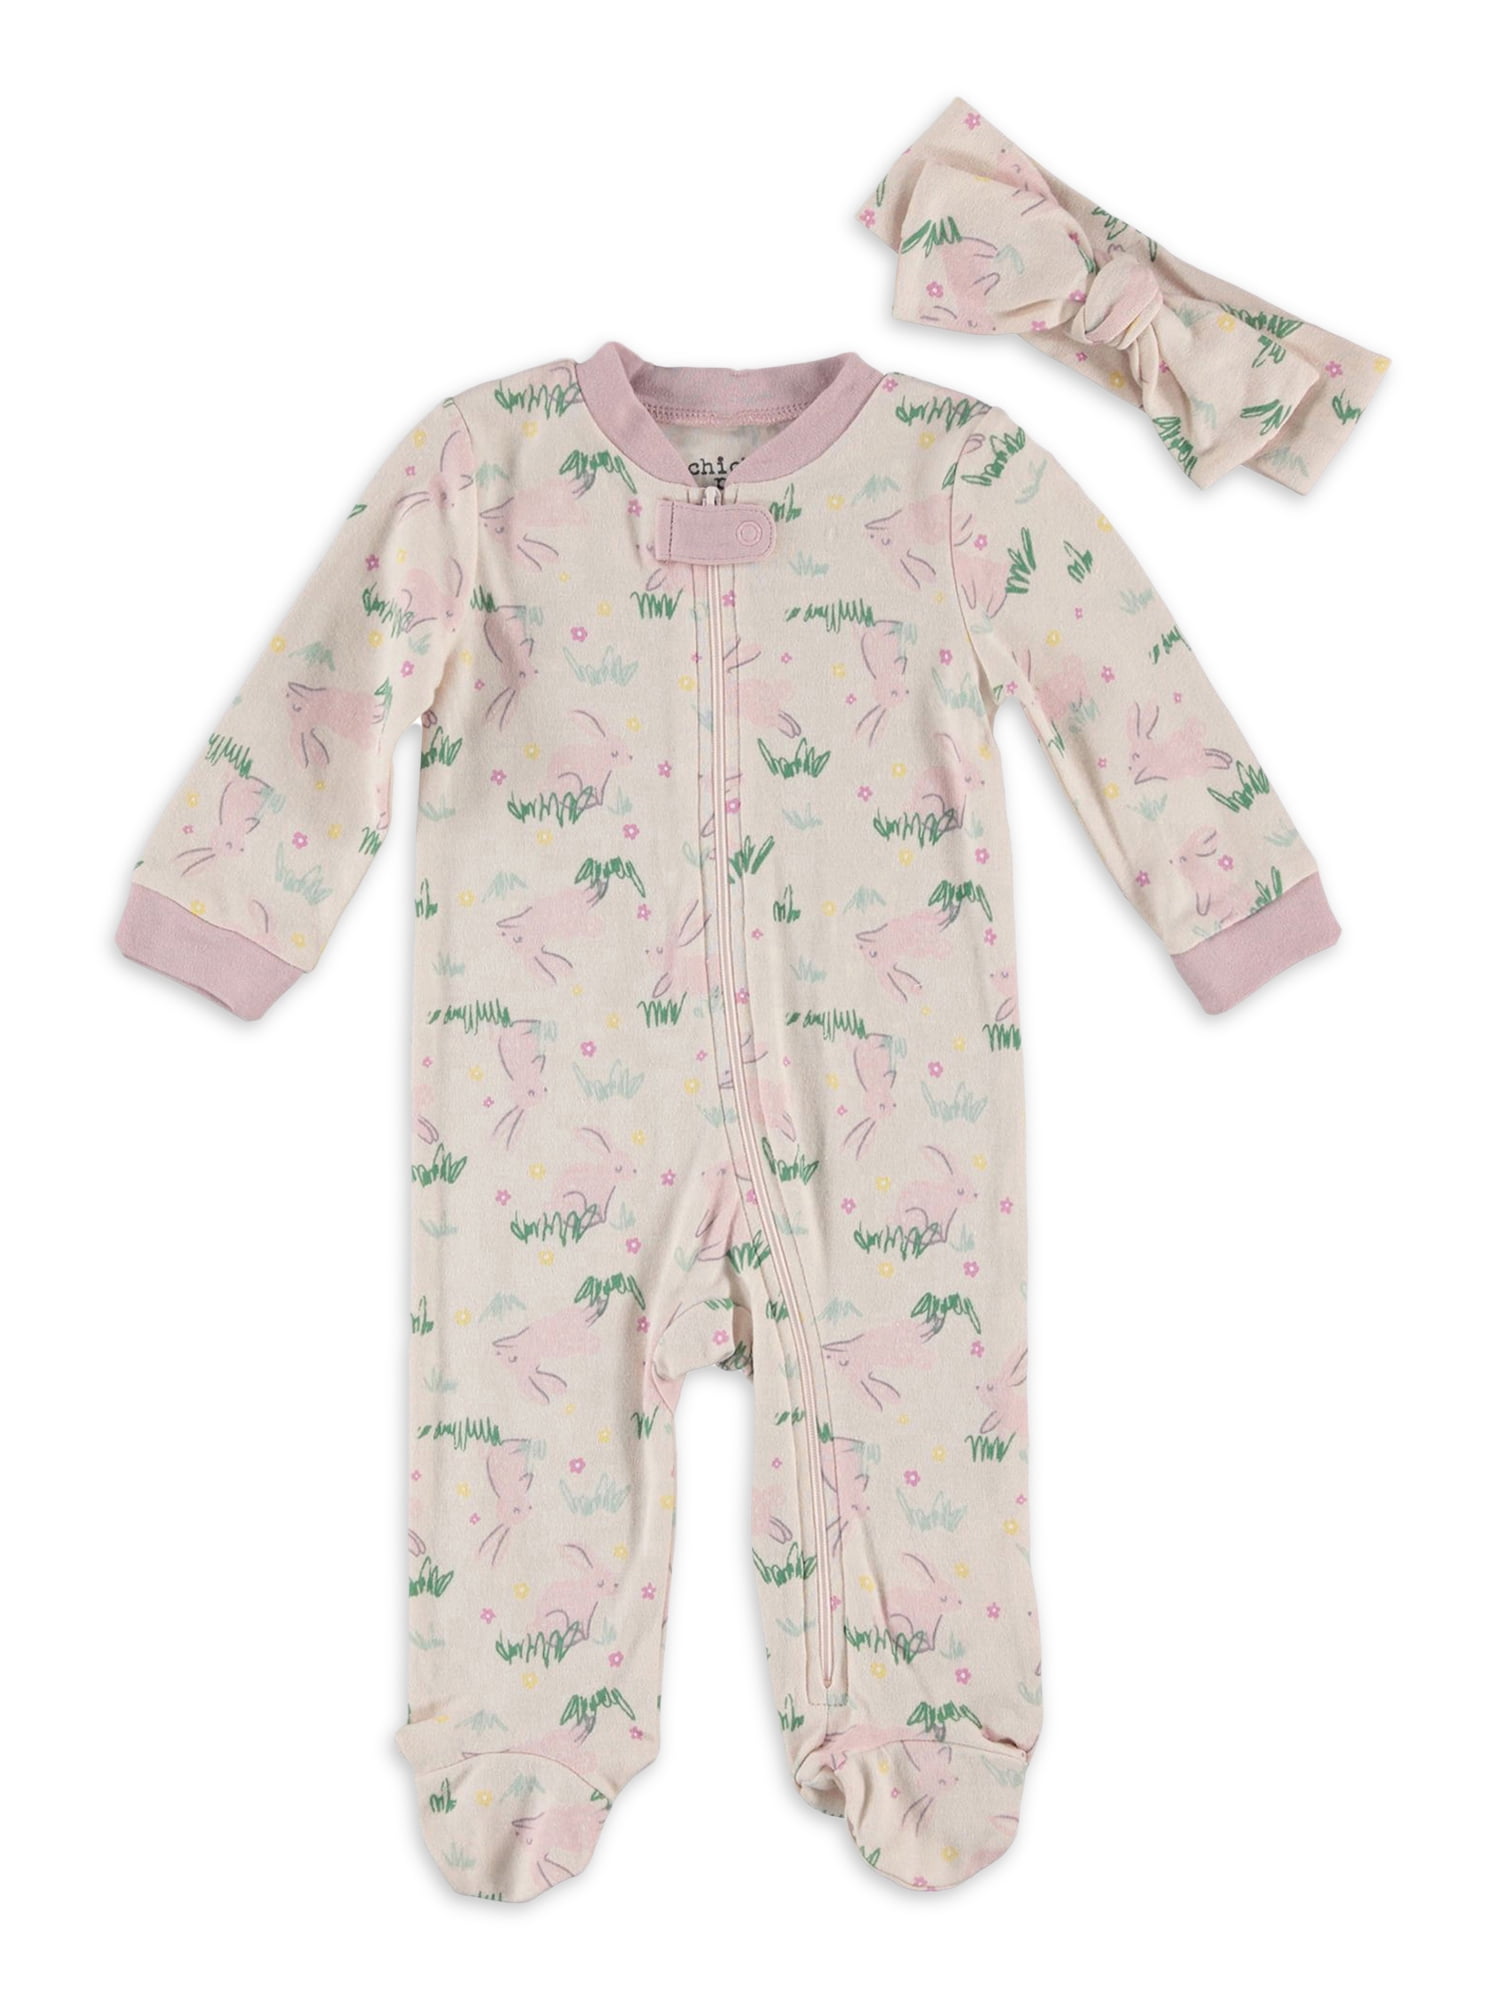 Burts Bees Baby Girl Organic Coverall Hat Set Size 3 6 9 months Layette Coral 